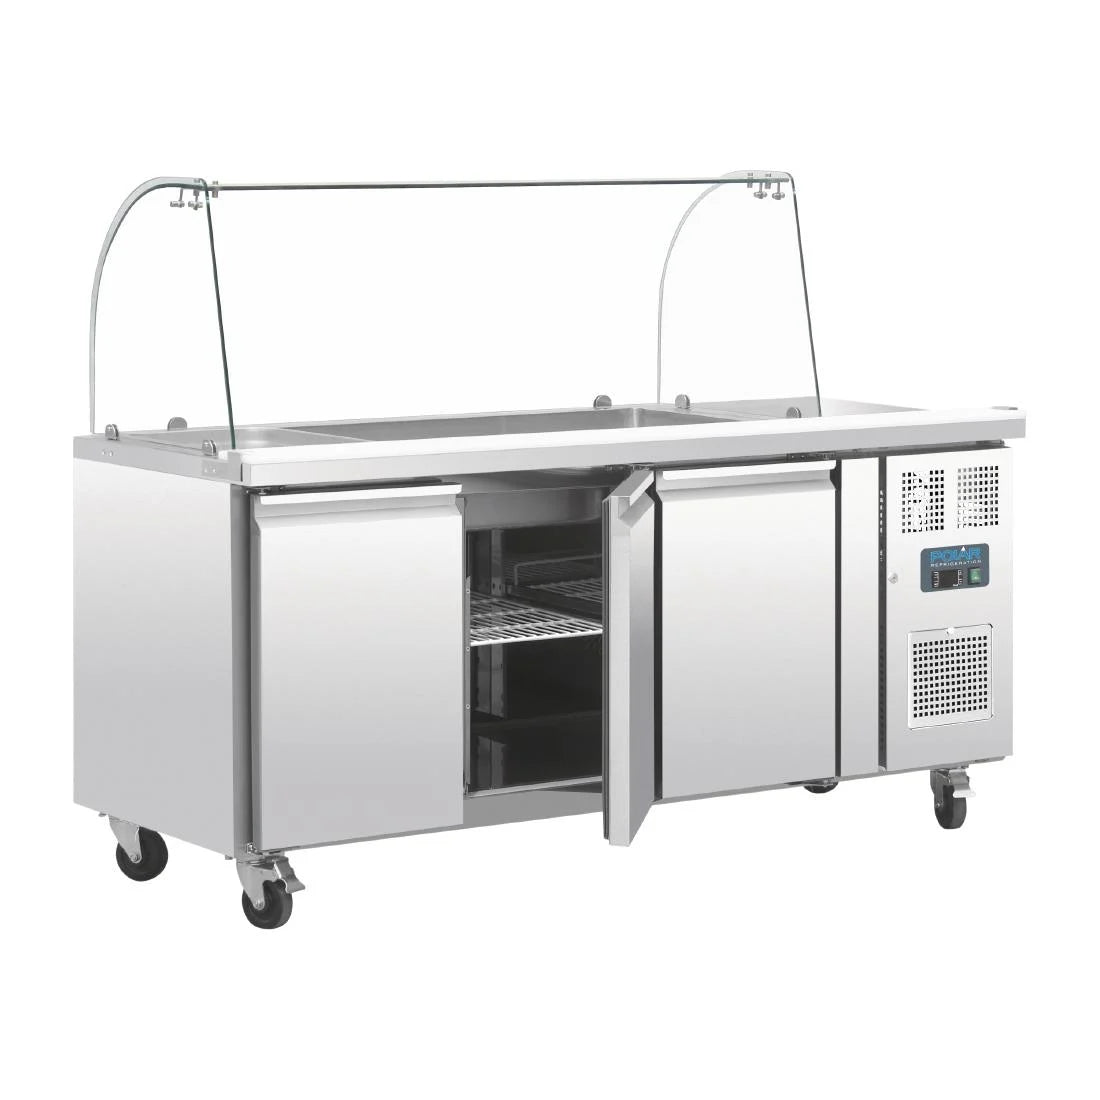 Polar U-Series Triple Door Refrigerated Gastronorm Saladette Counter.Product Ref:00683.Model:CT394. 🚚 5-7 Days Delivery